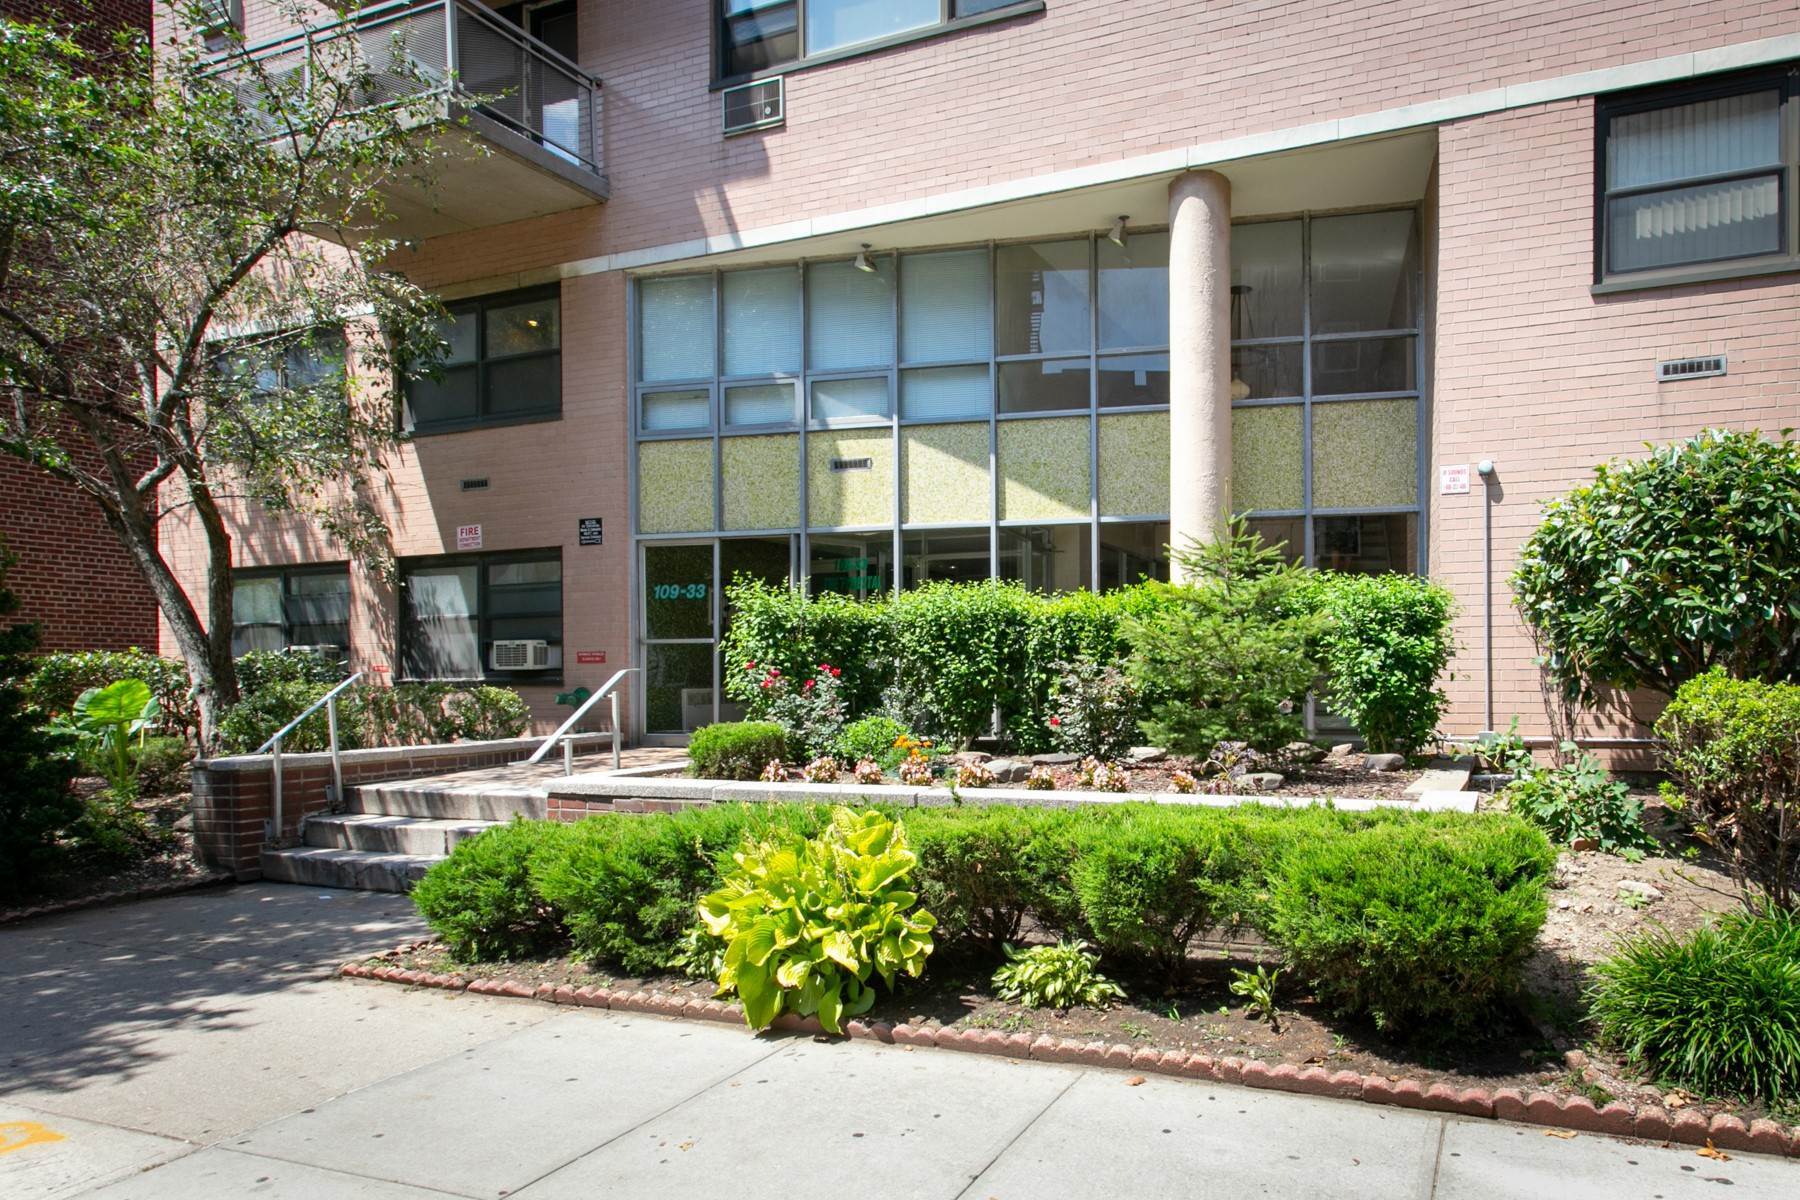 Condominiums for Sale at 'RARELY AVAILABLE 1 BEDROOM CONDO IN FOREST HILLS' 109-33 71st Road, #5G Forest Hills, New York 11375 United States